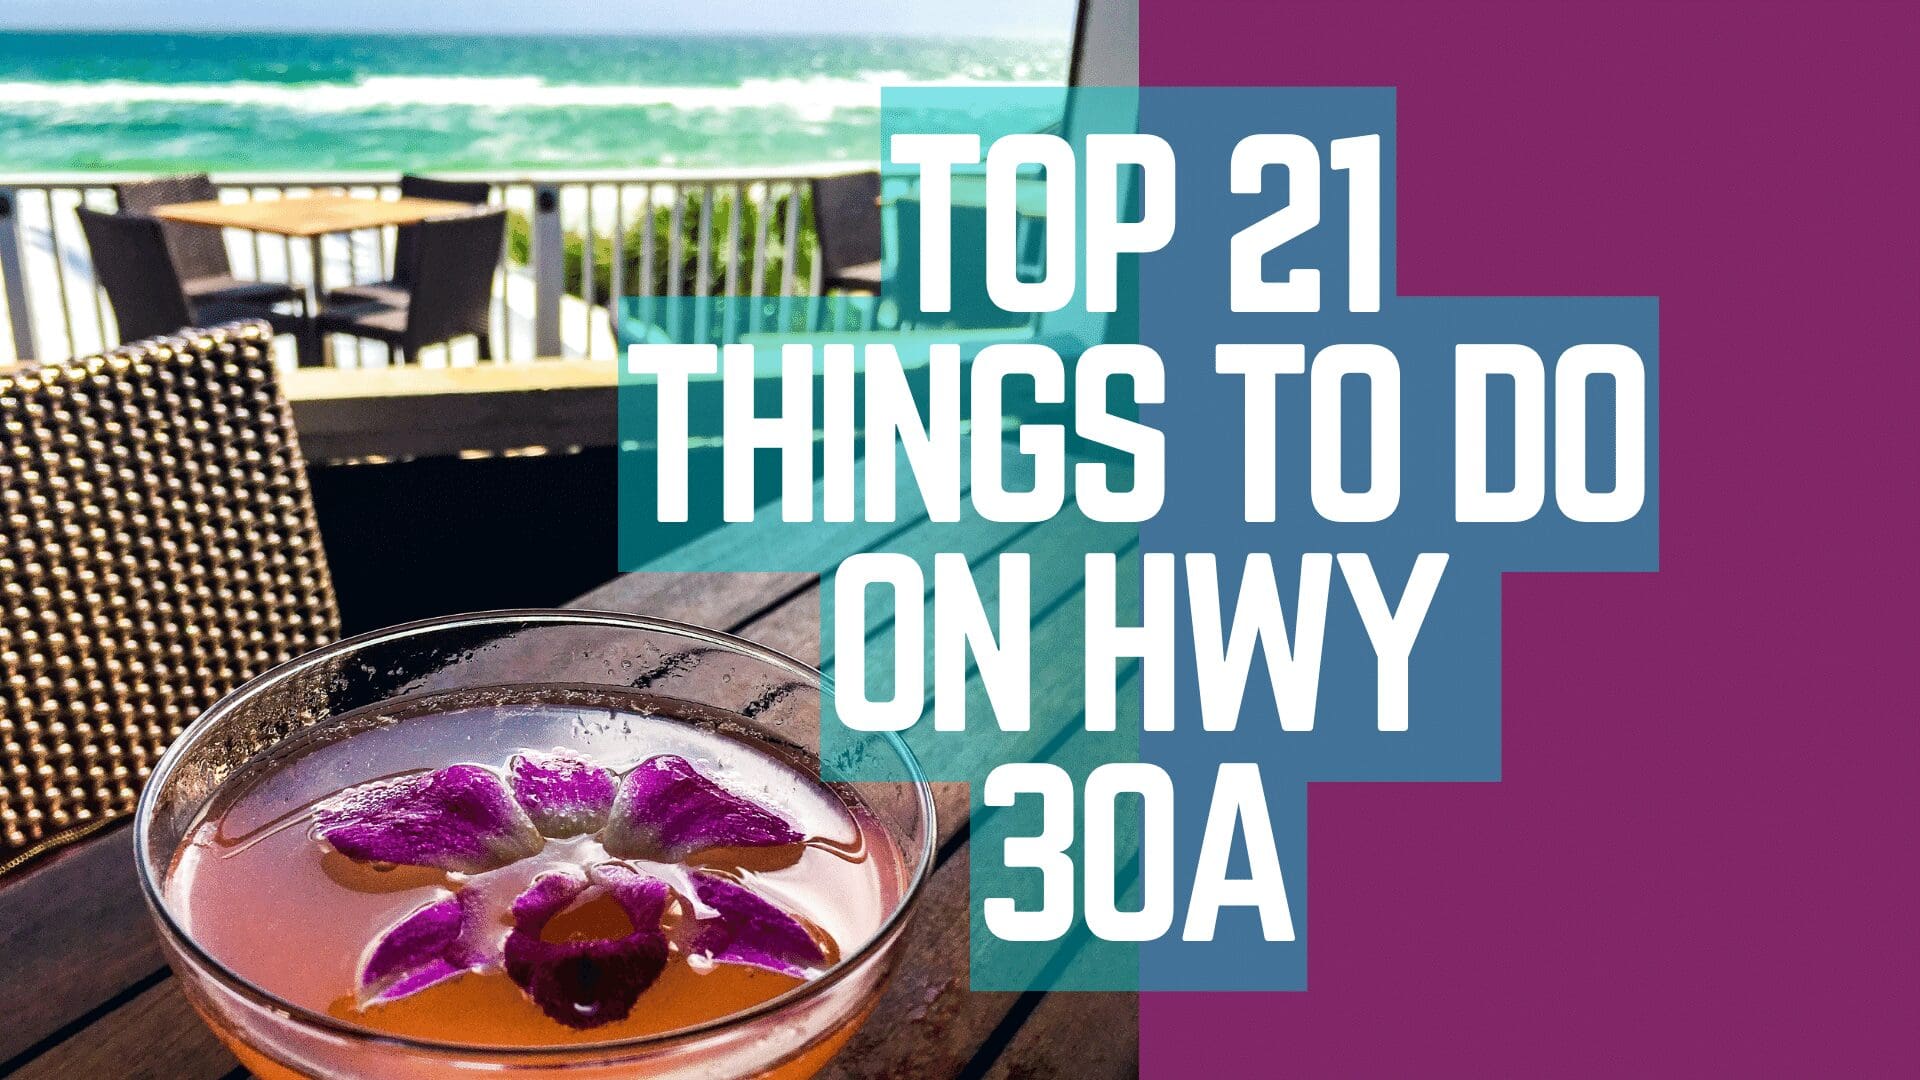 Top 21 things to do on hwy 30a florida rooftop ocean view